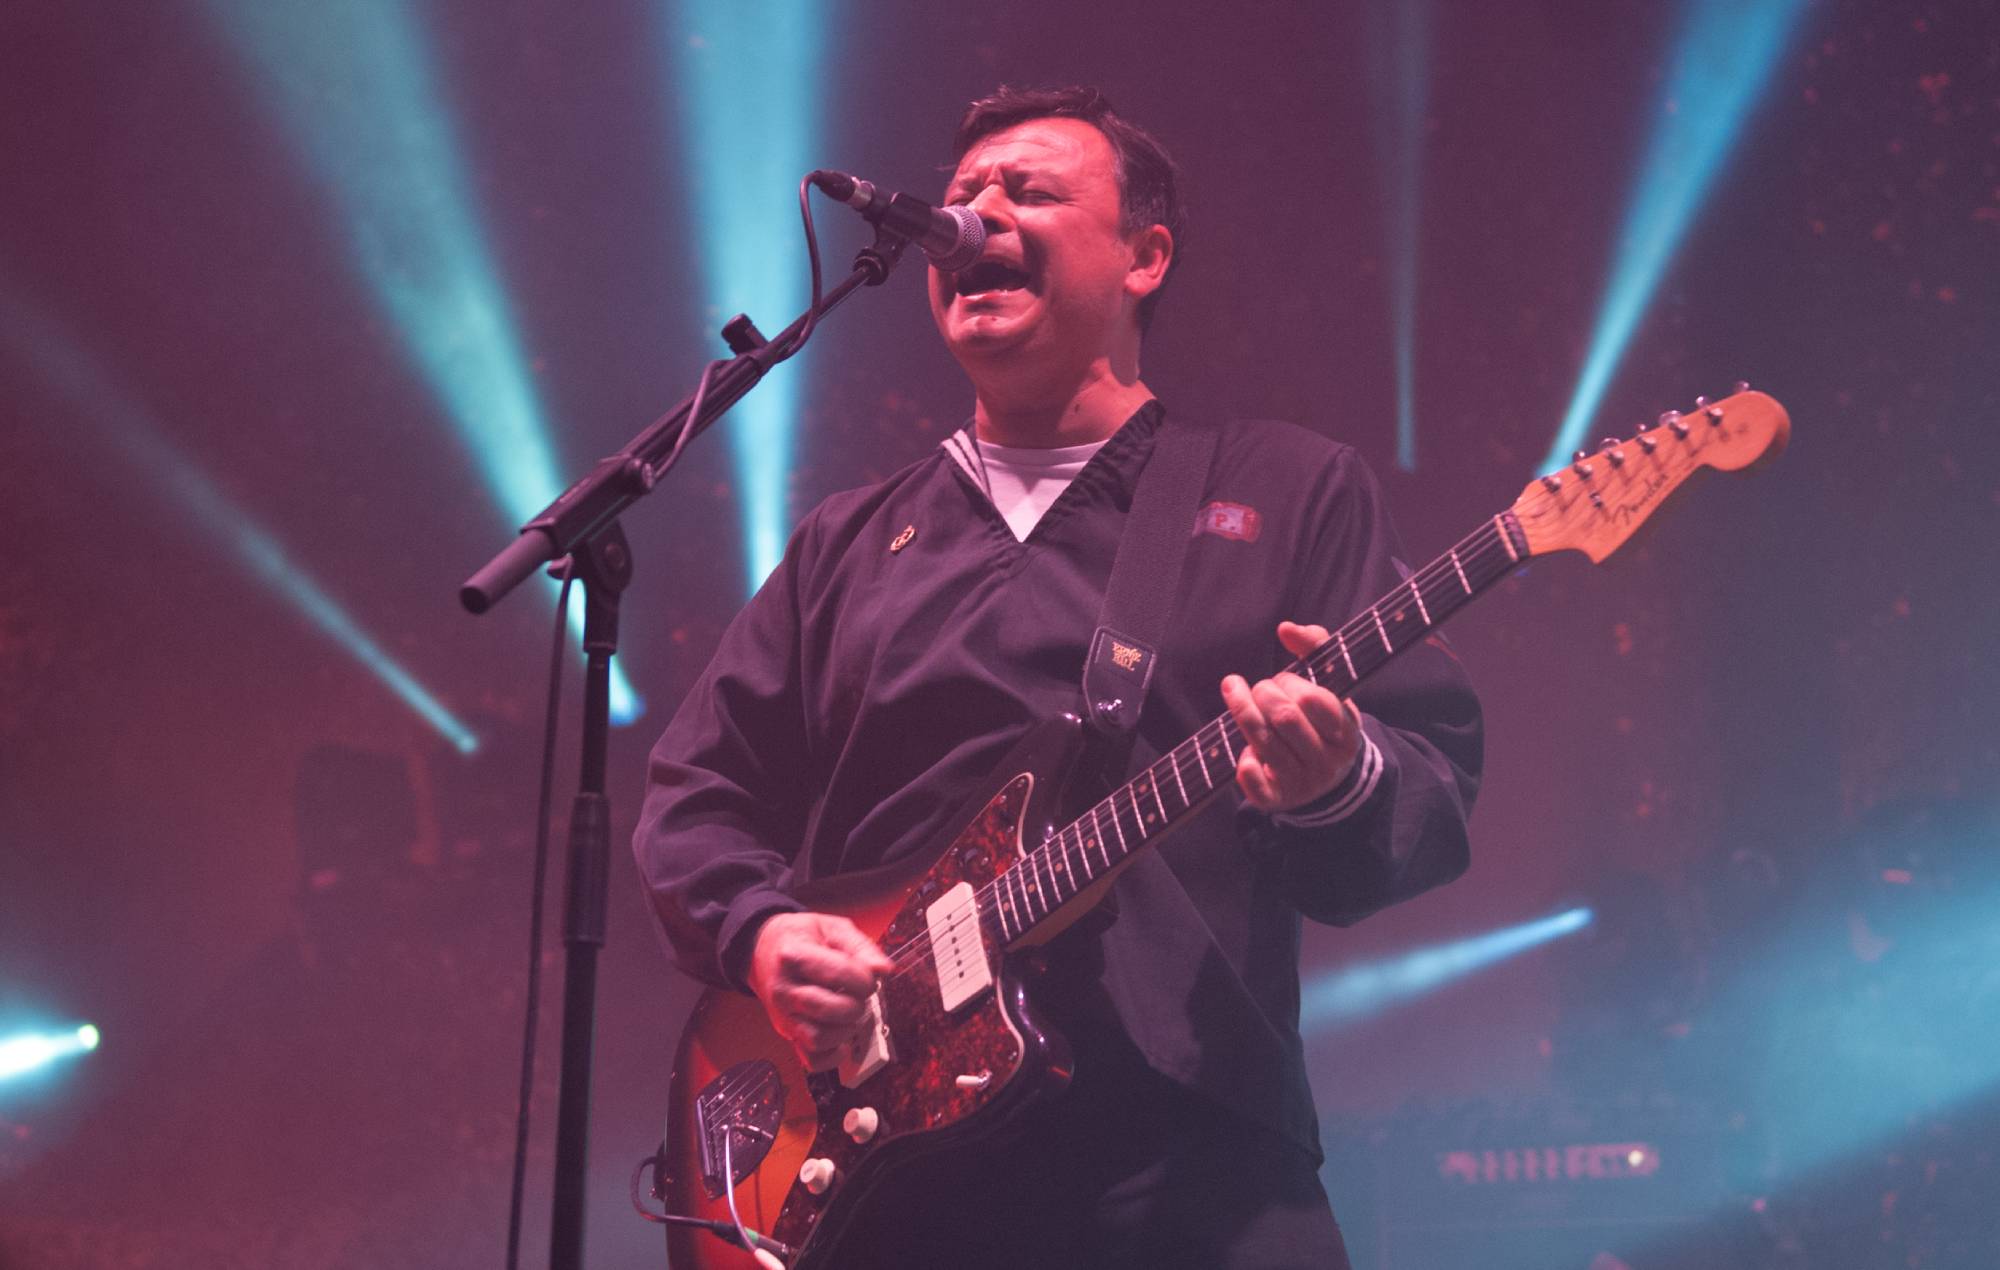 Manic Street Preachers to celebrate 30th anniversary of ‘The Holy Bible’ with special film screening